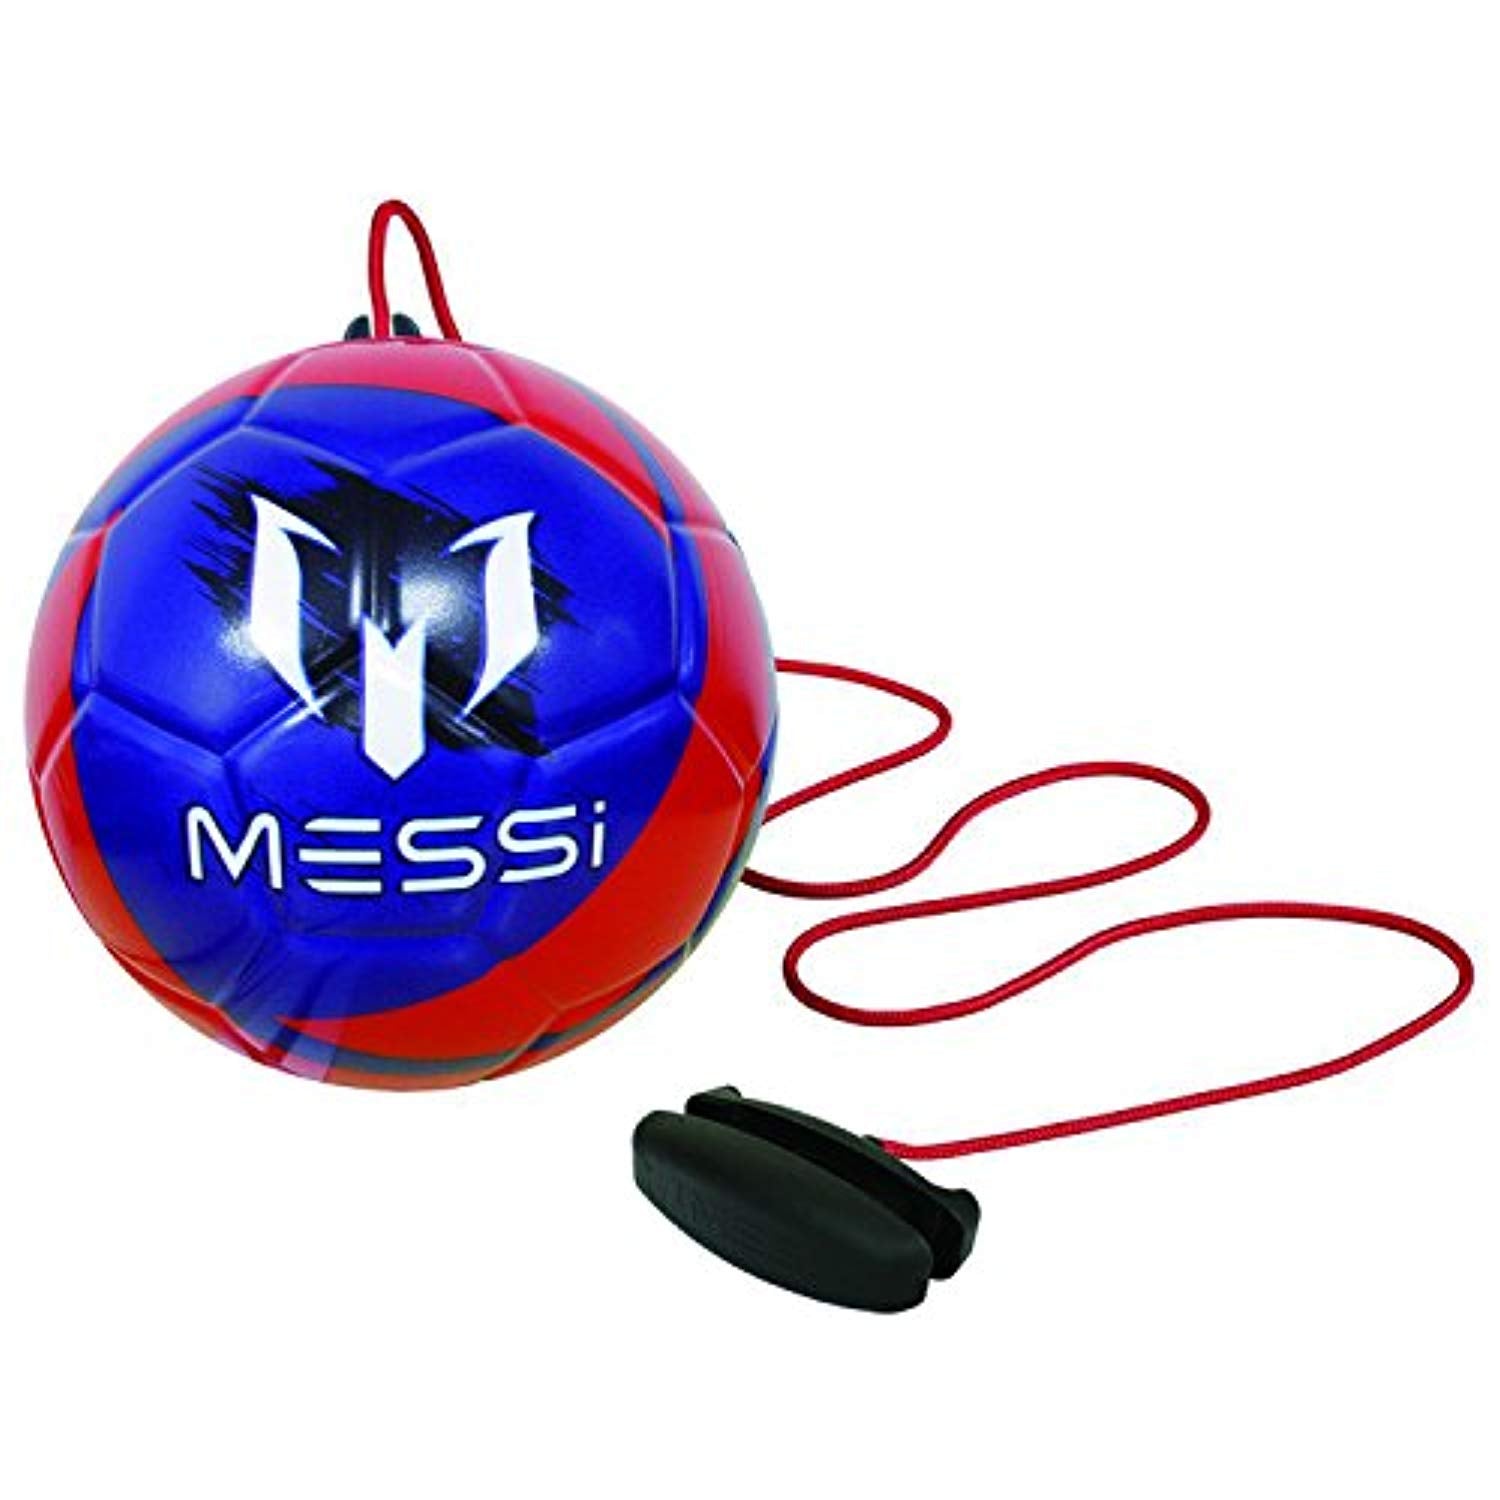 Messi Soft Touch Training Soccer Ball